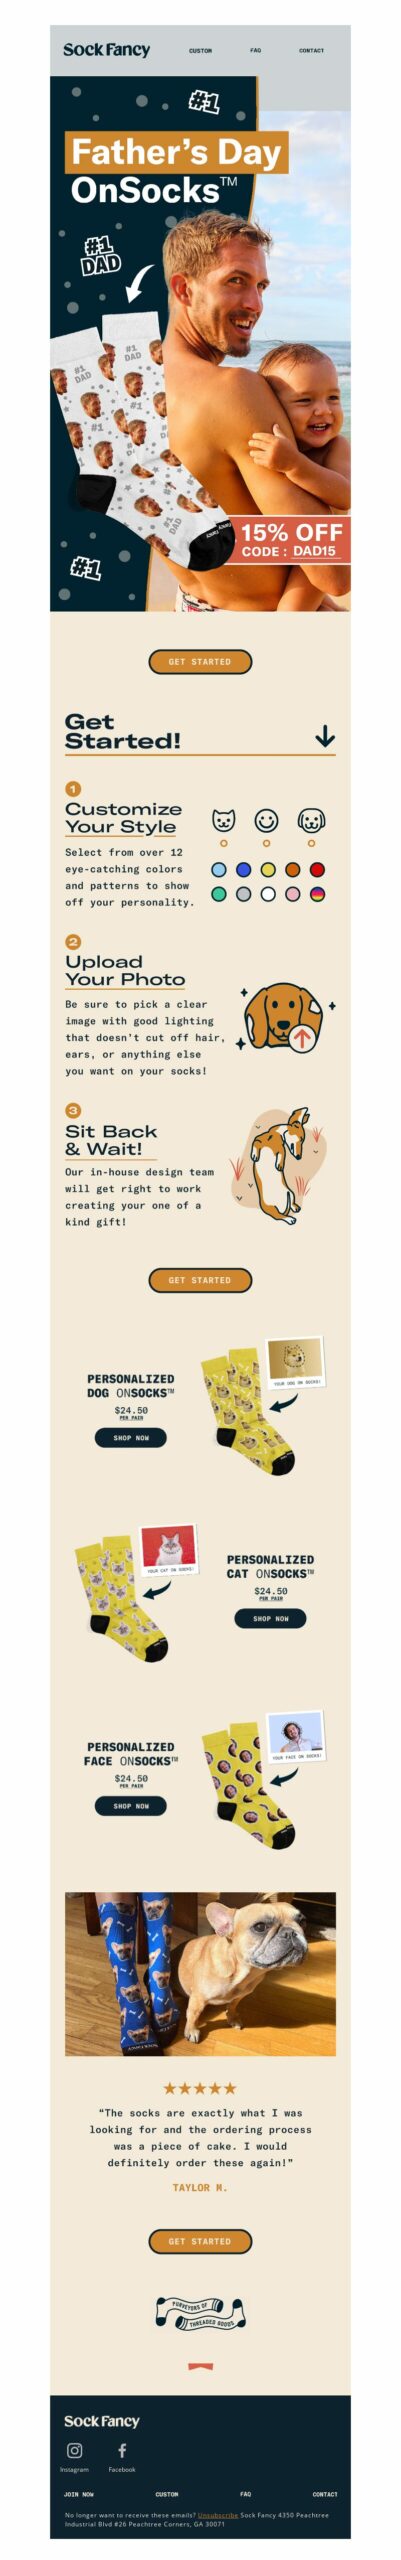 Sock Fancy's promotional email for Father's Day, offering 15% off on its unique sock collection.